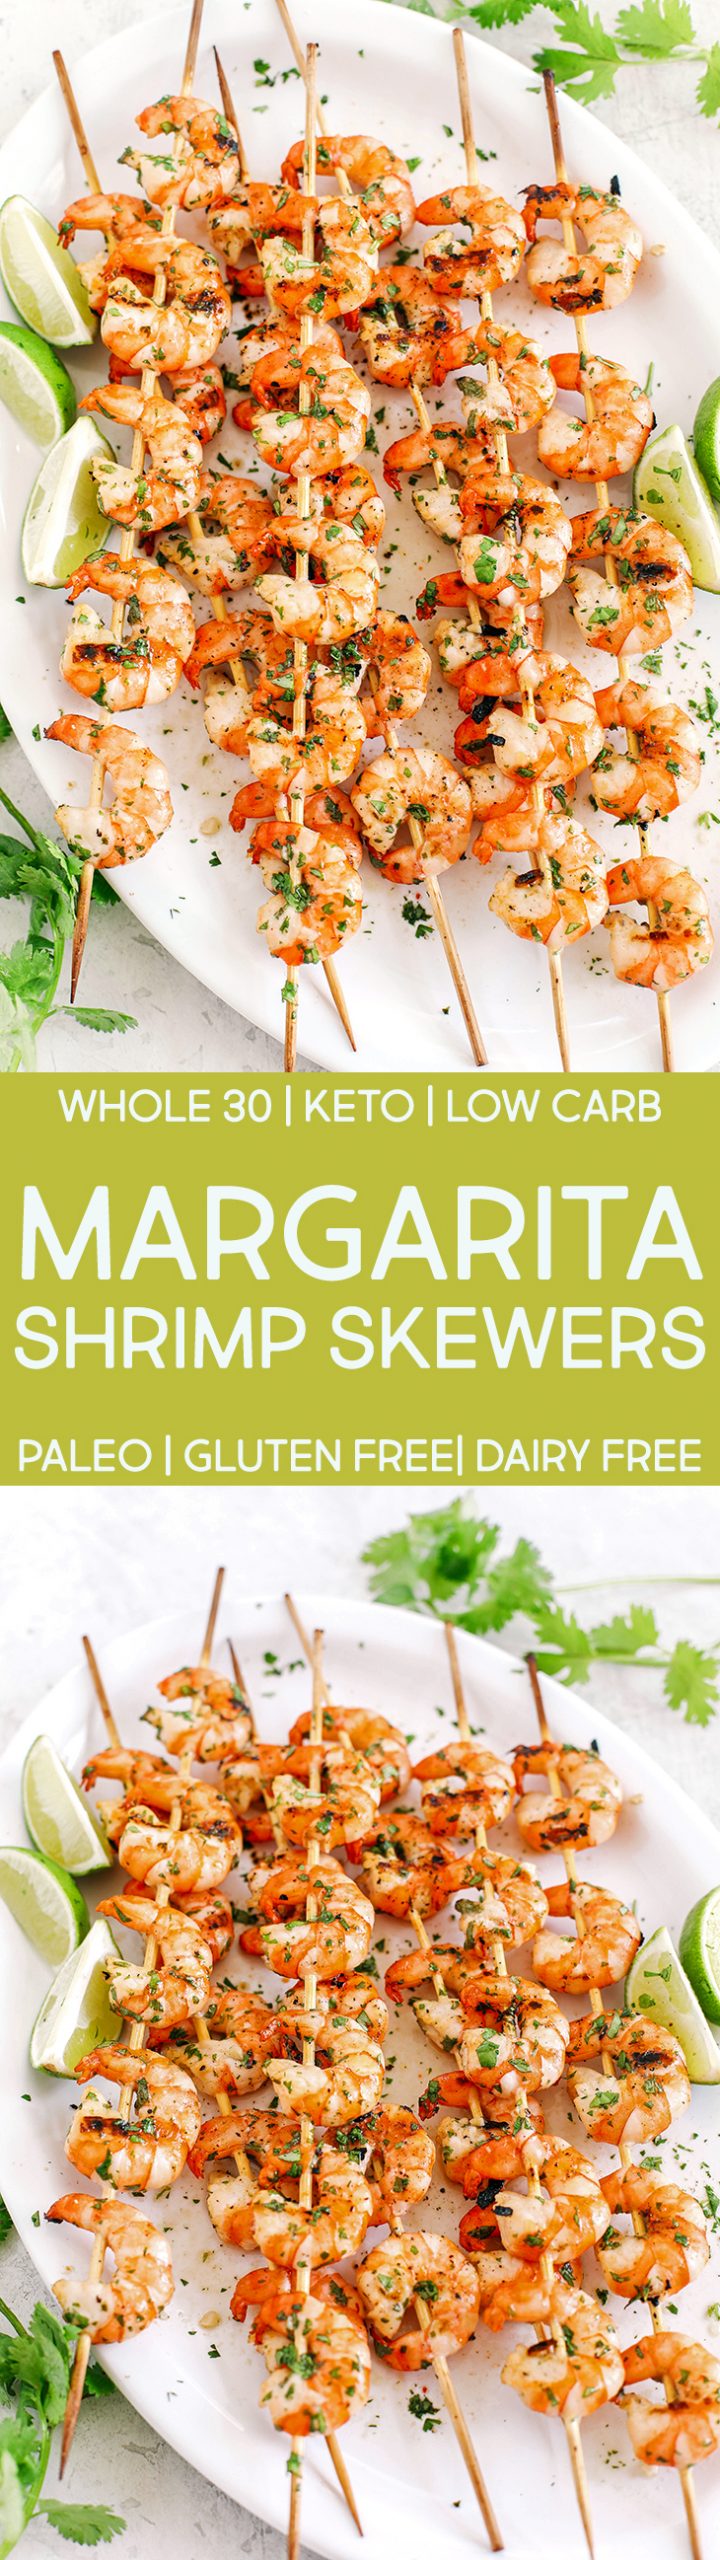 These Margarita Shrimp Skewers make the perfect summer meal that is light, healthy and marinated in garlic, fresh lime juice, cilantro and of course, tequila!  